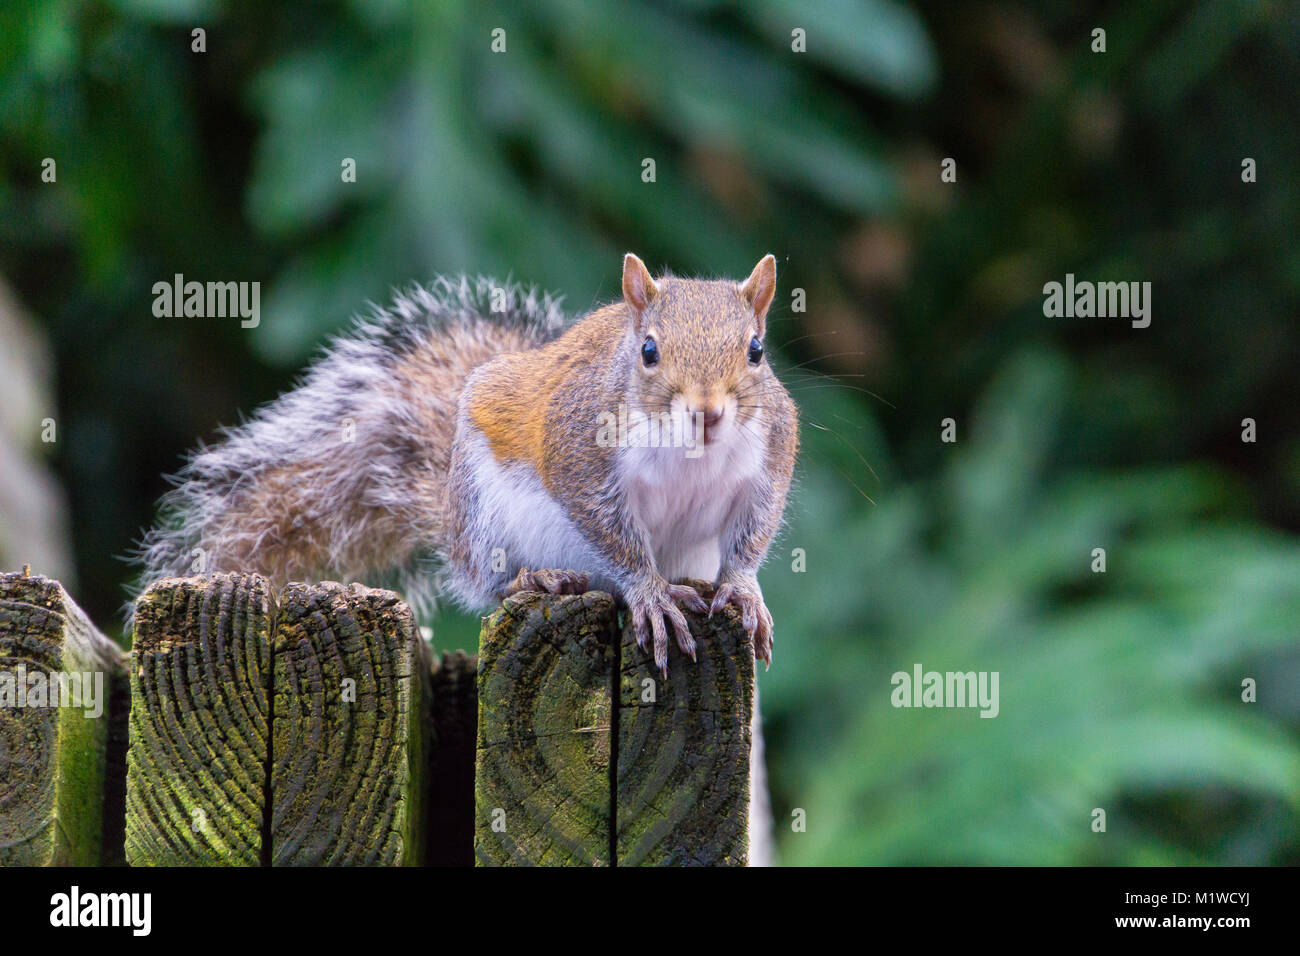 USA, Florida, Frontal view of a brown squirrel sitting on the edge of a wooden bench Stock Photo